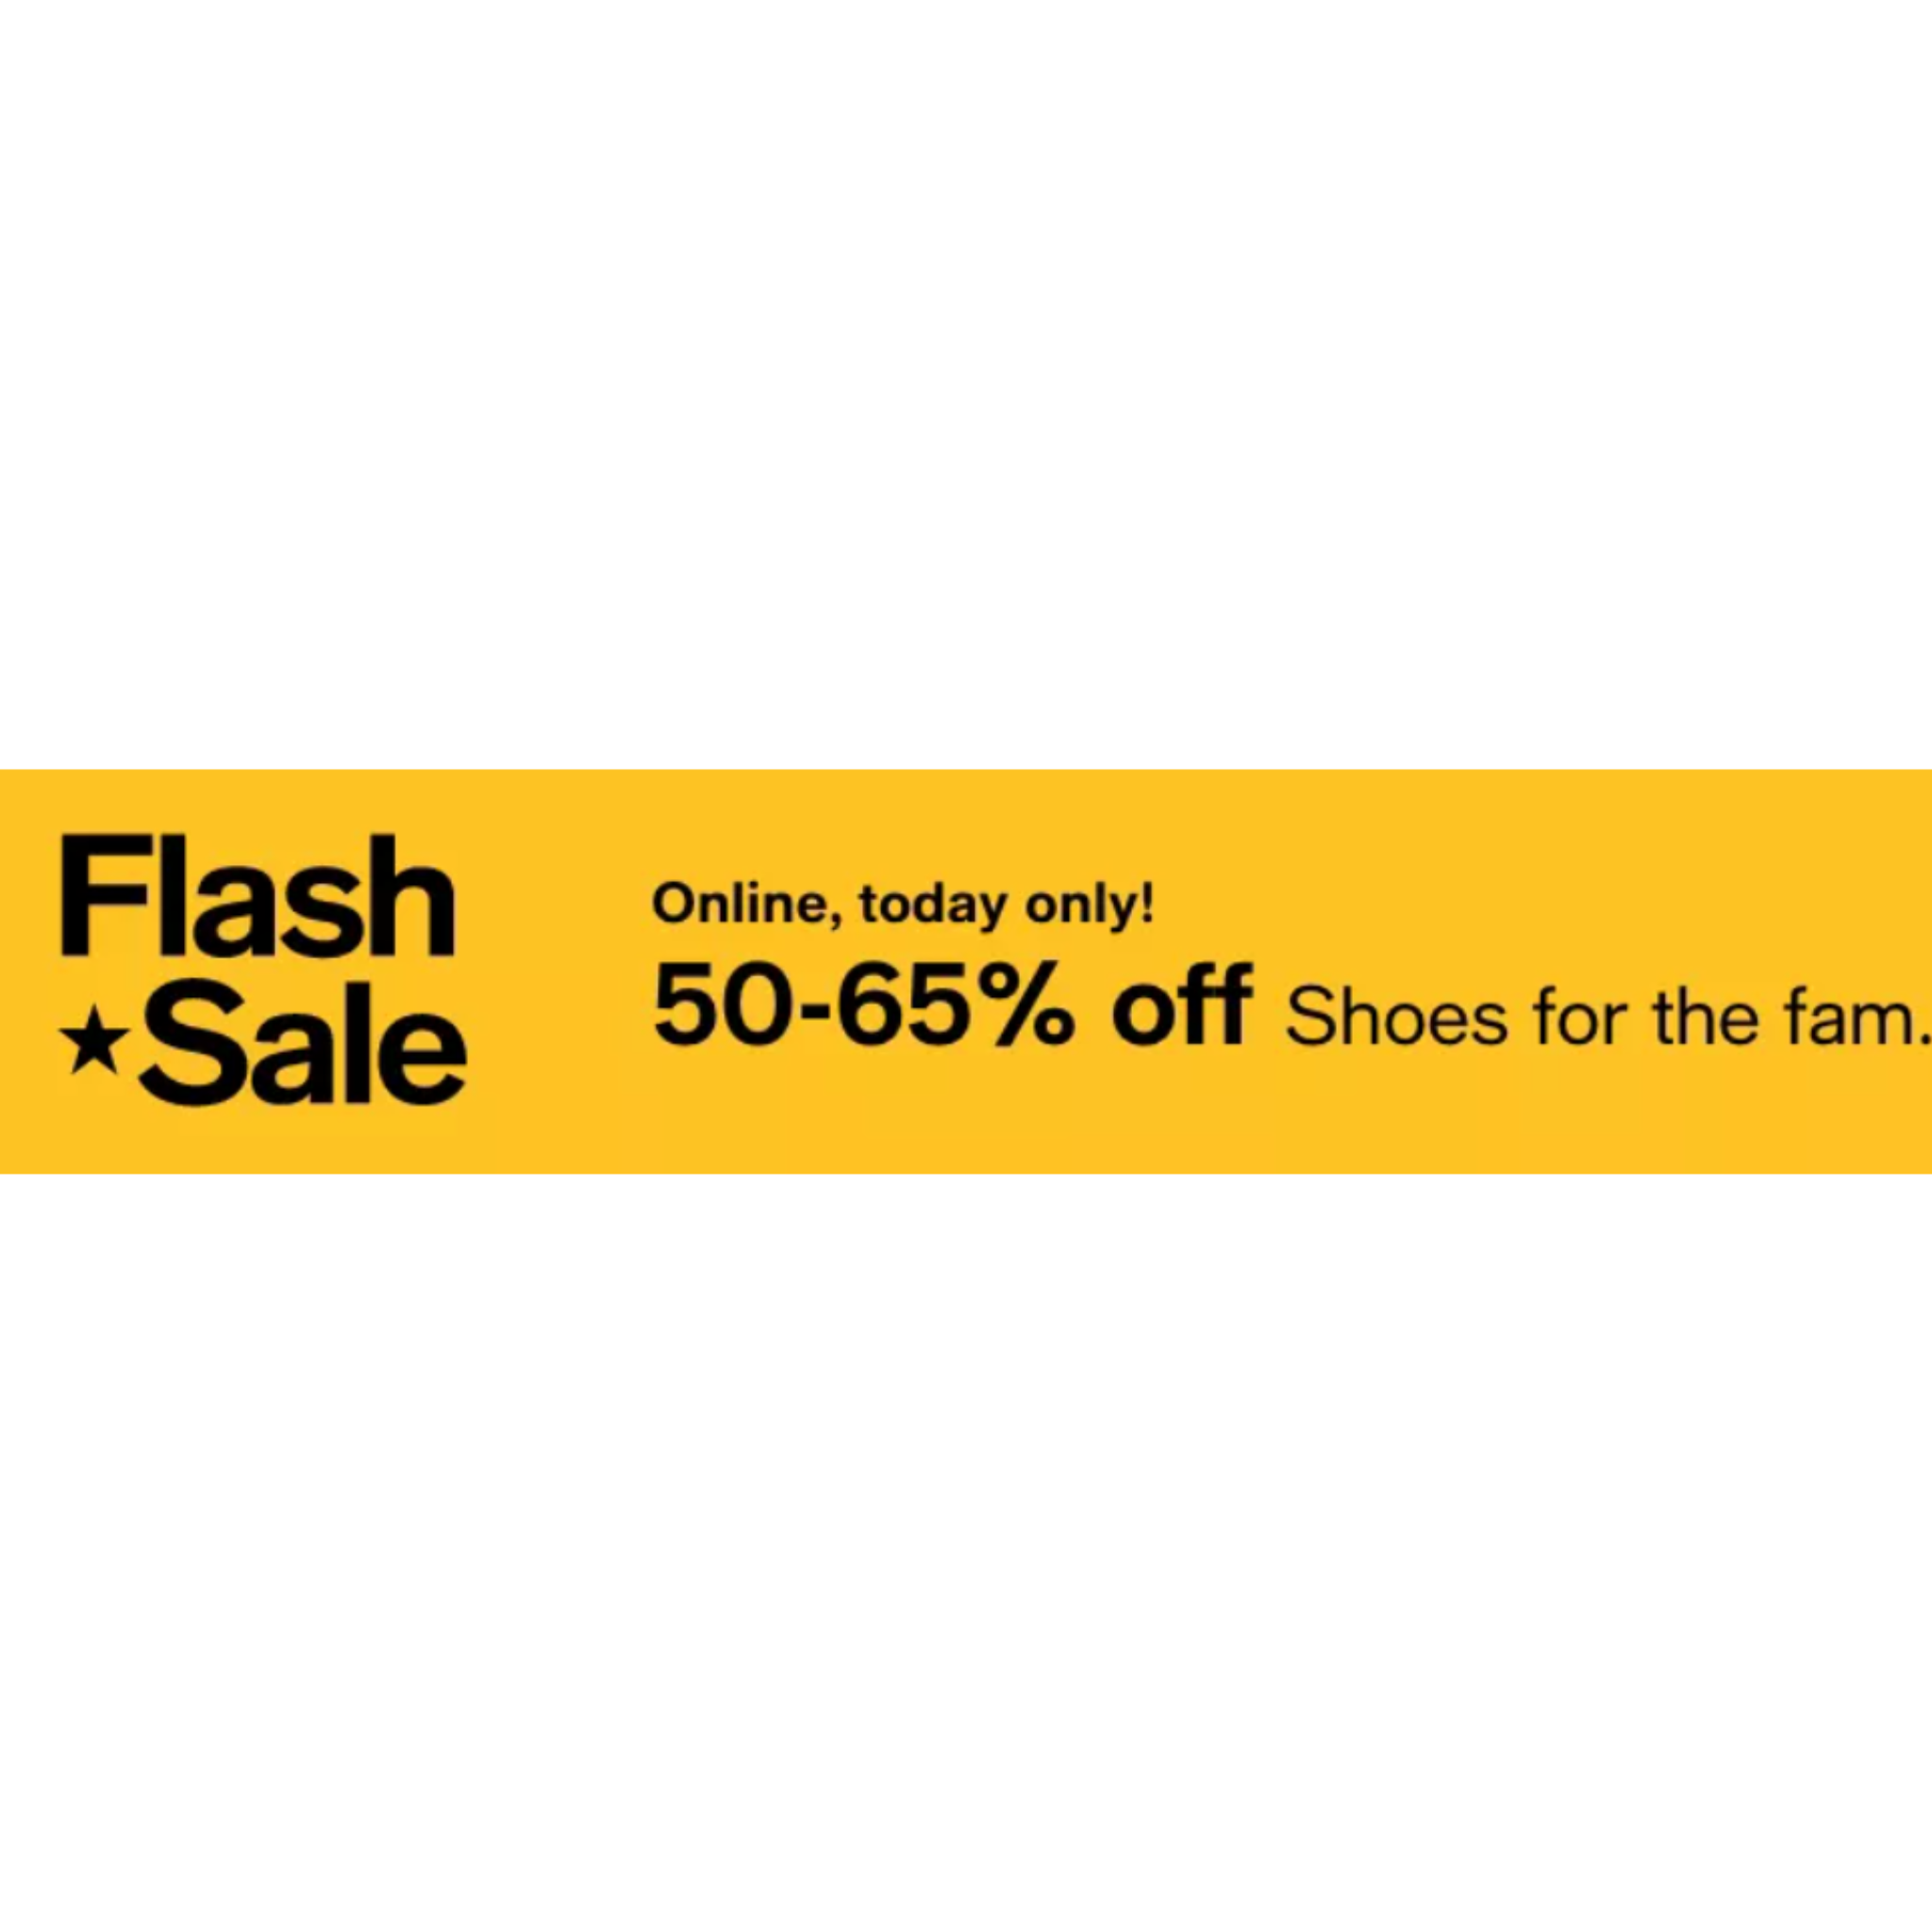 Macy's Flash Sale on Shoes TODAY ONLY! 50-60% OFF!!